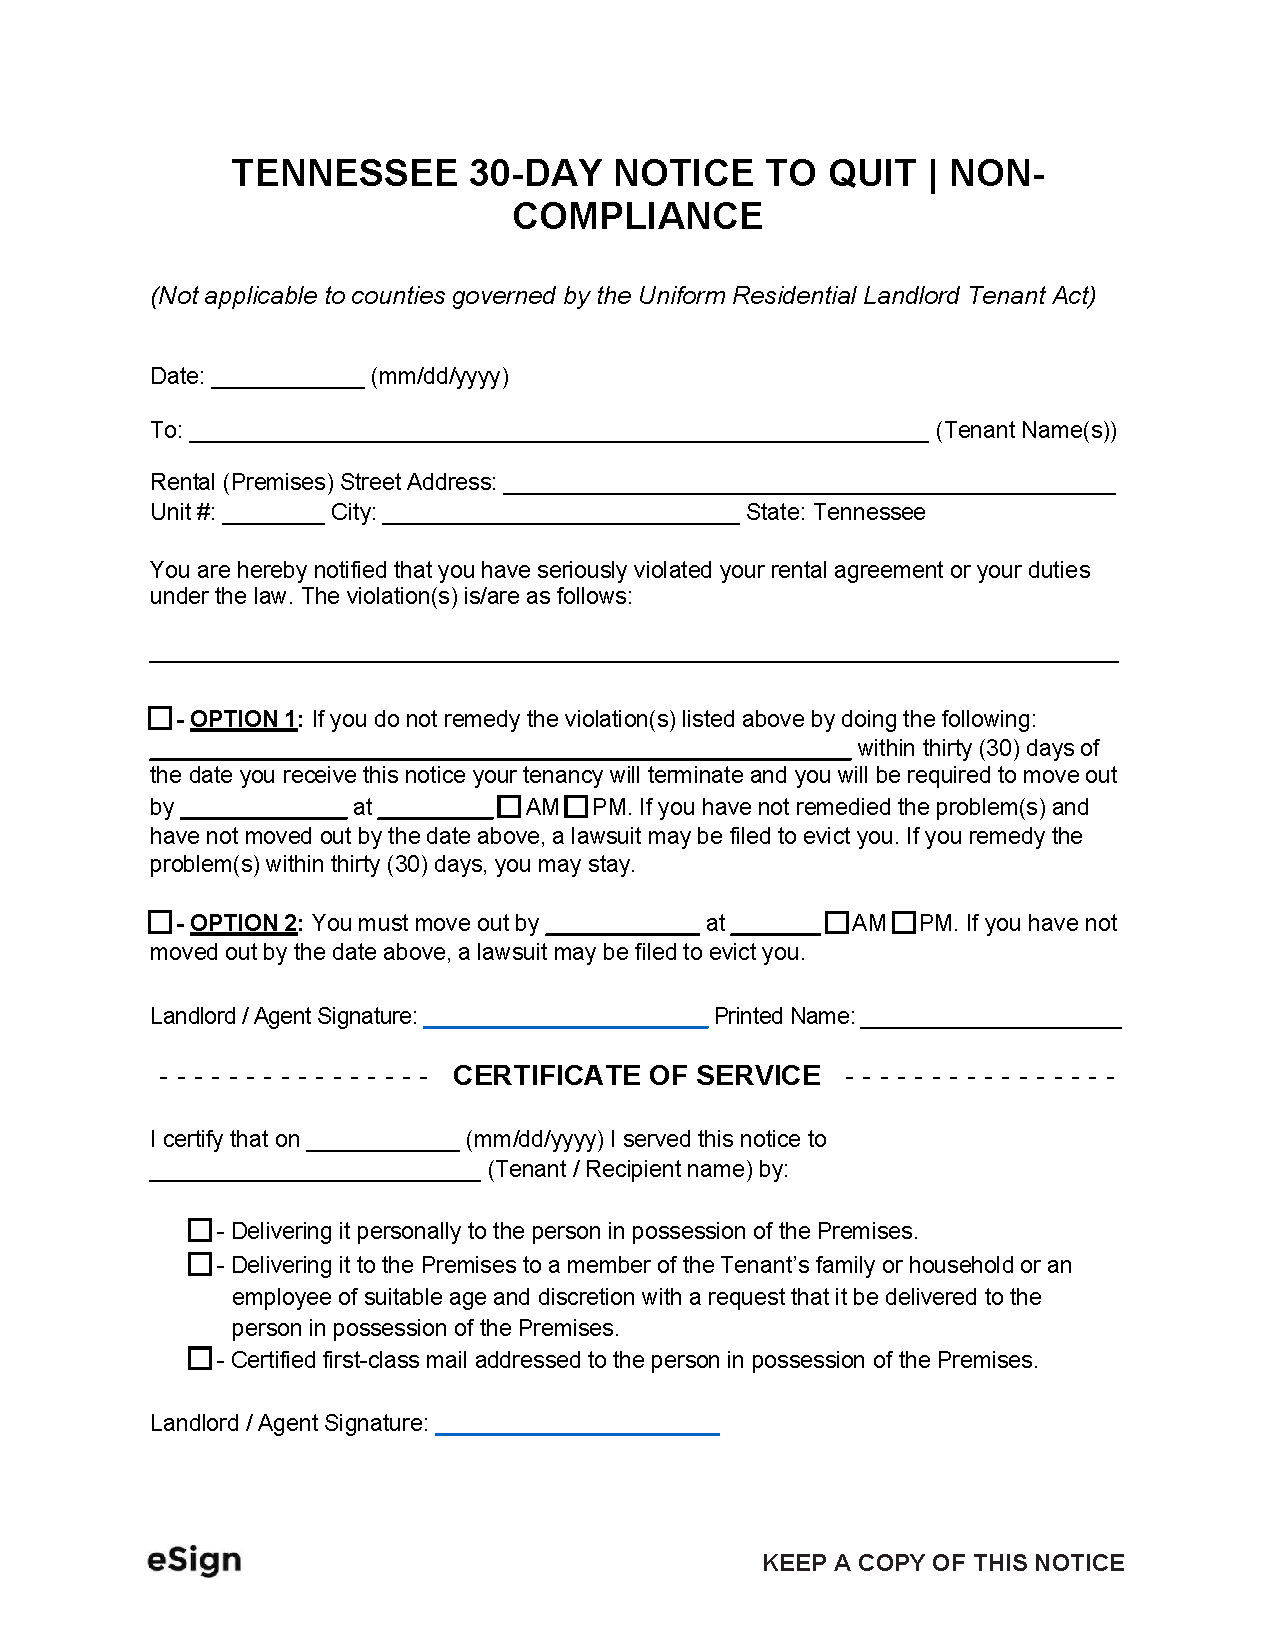 free-tennessee-30-day-notice-to-quit-non-compliance-pdf-word